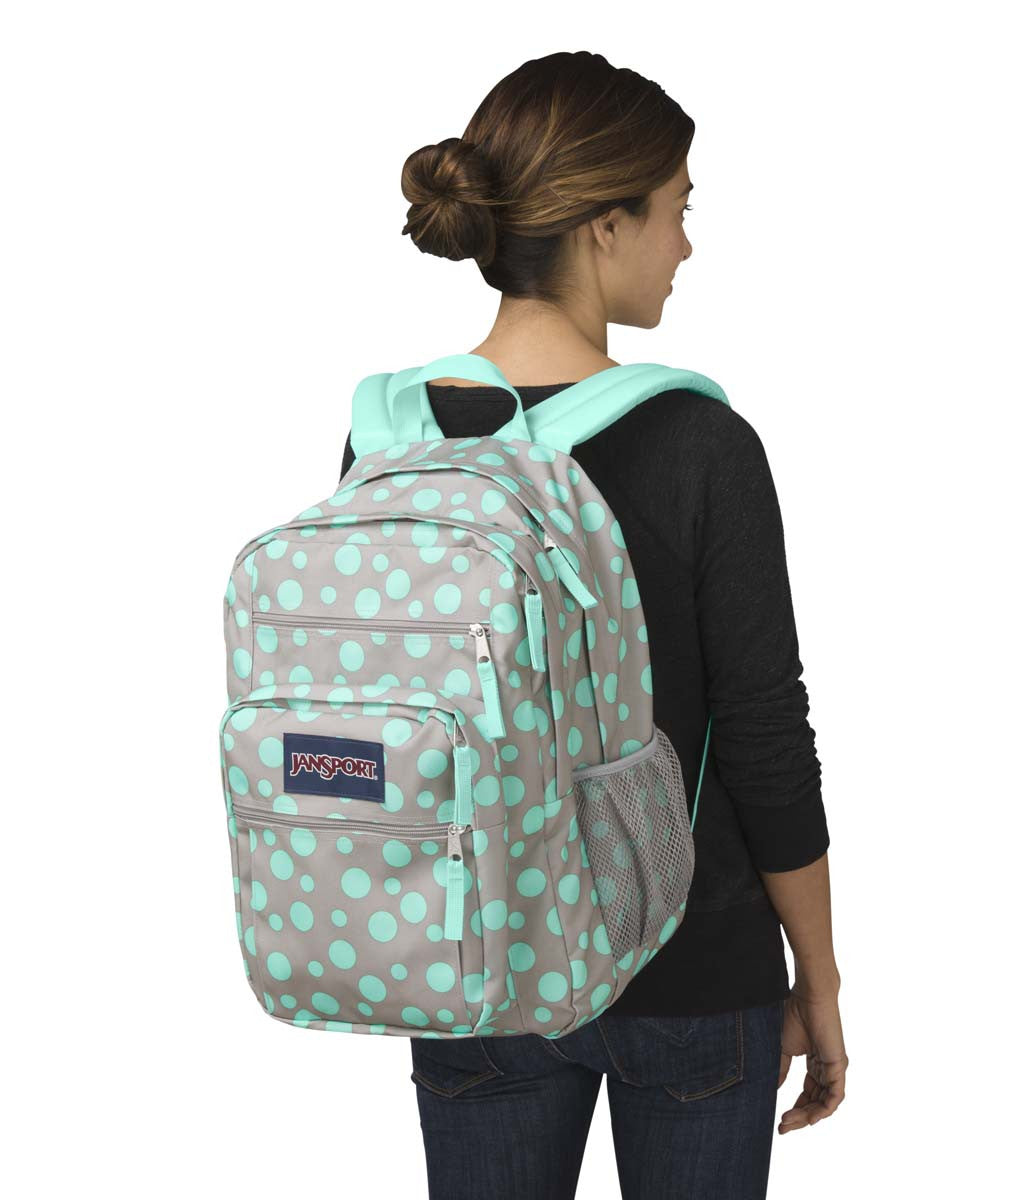 Here are some of the best reviewed clear backpacks for back to school